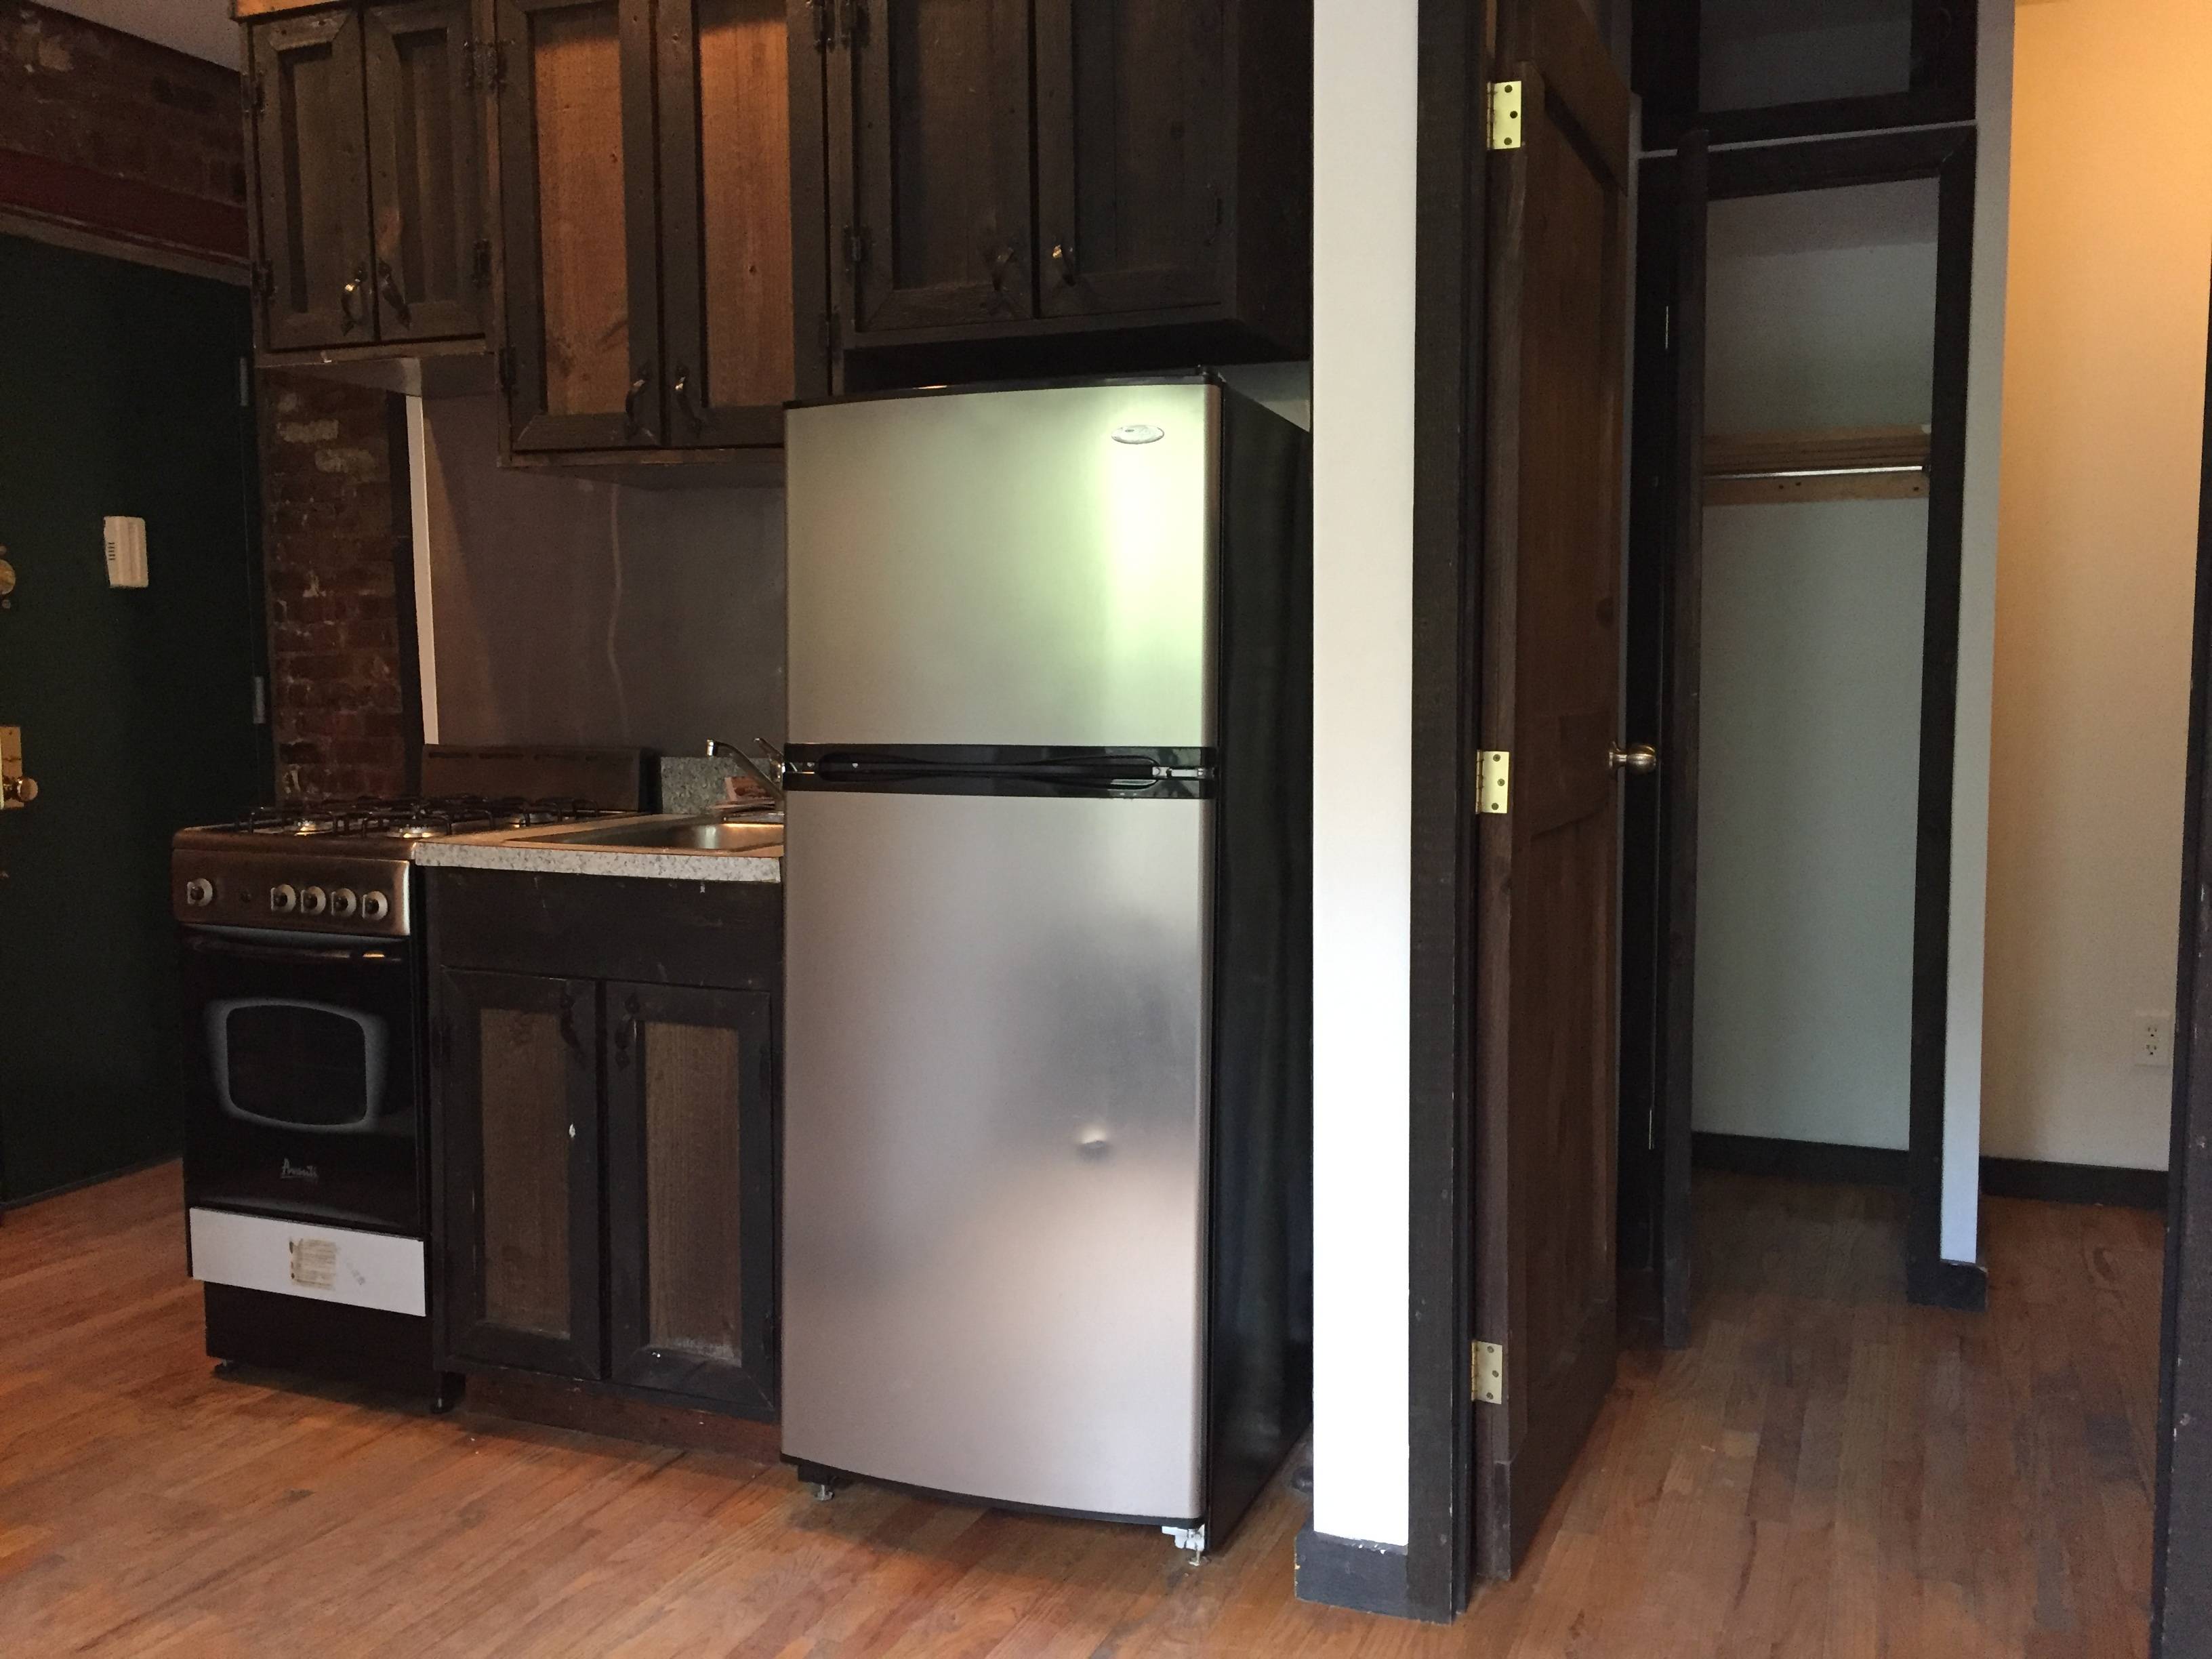 East Village: Charming 1 Bedroom with Washer/Dryer in Unit